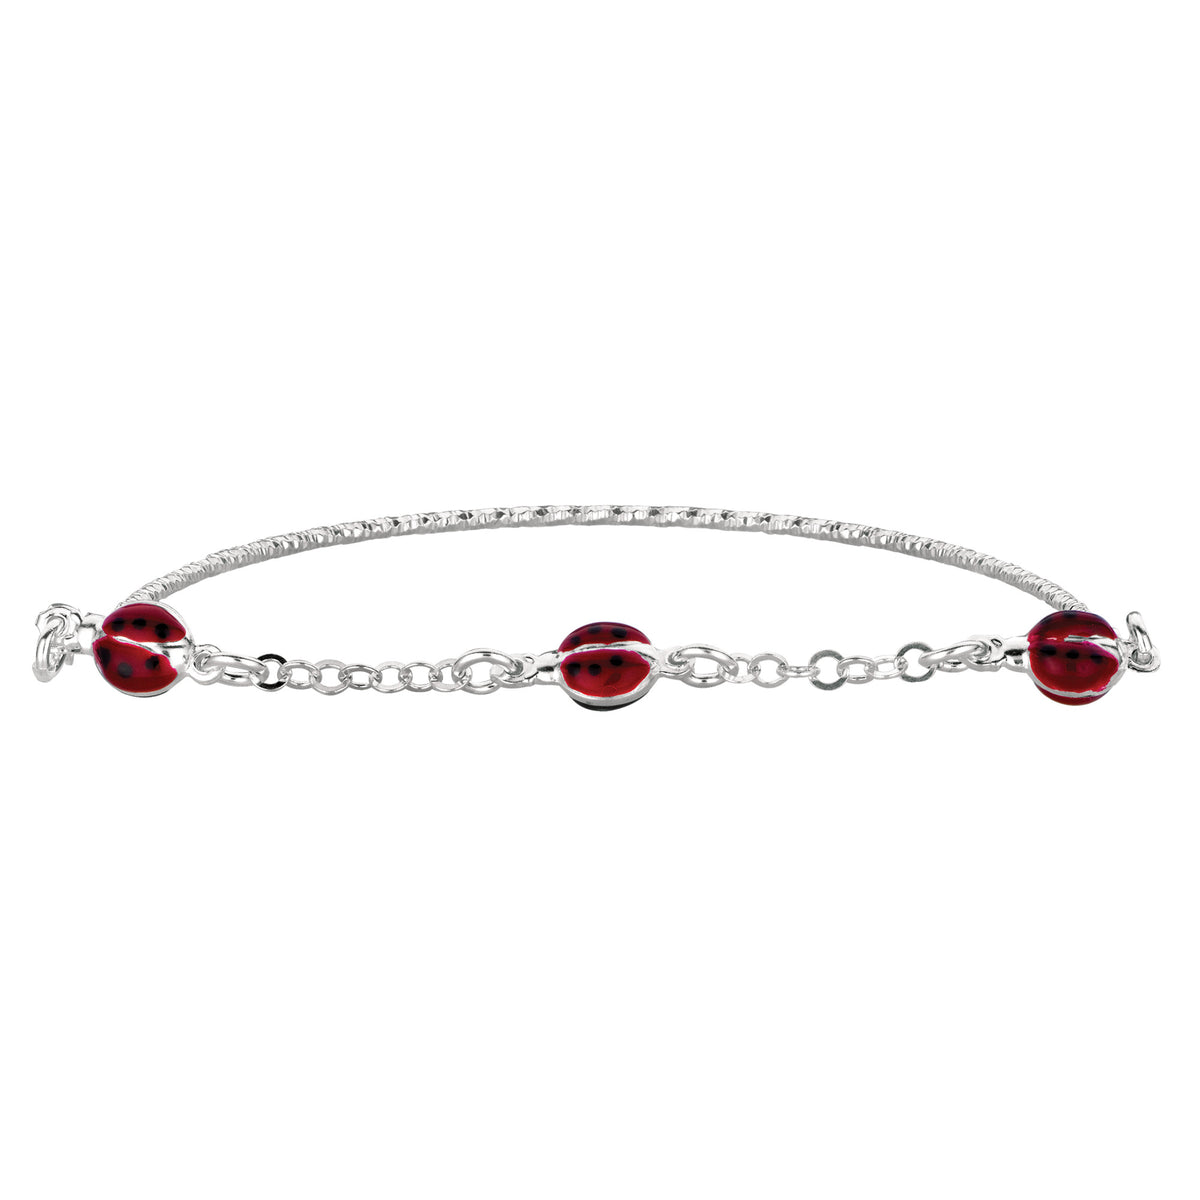 Baby Bangle With Ladybug Enameled Charms In Sterling Silver - 5.5 Inch fine designer jewelry for men and women